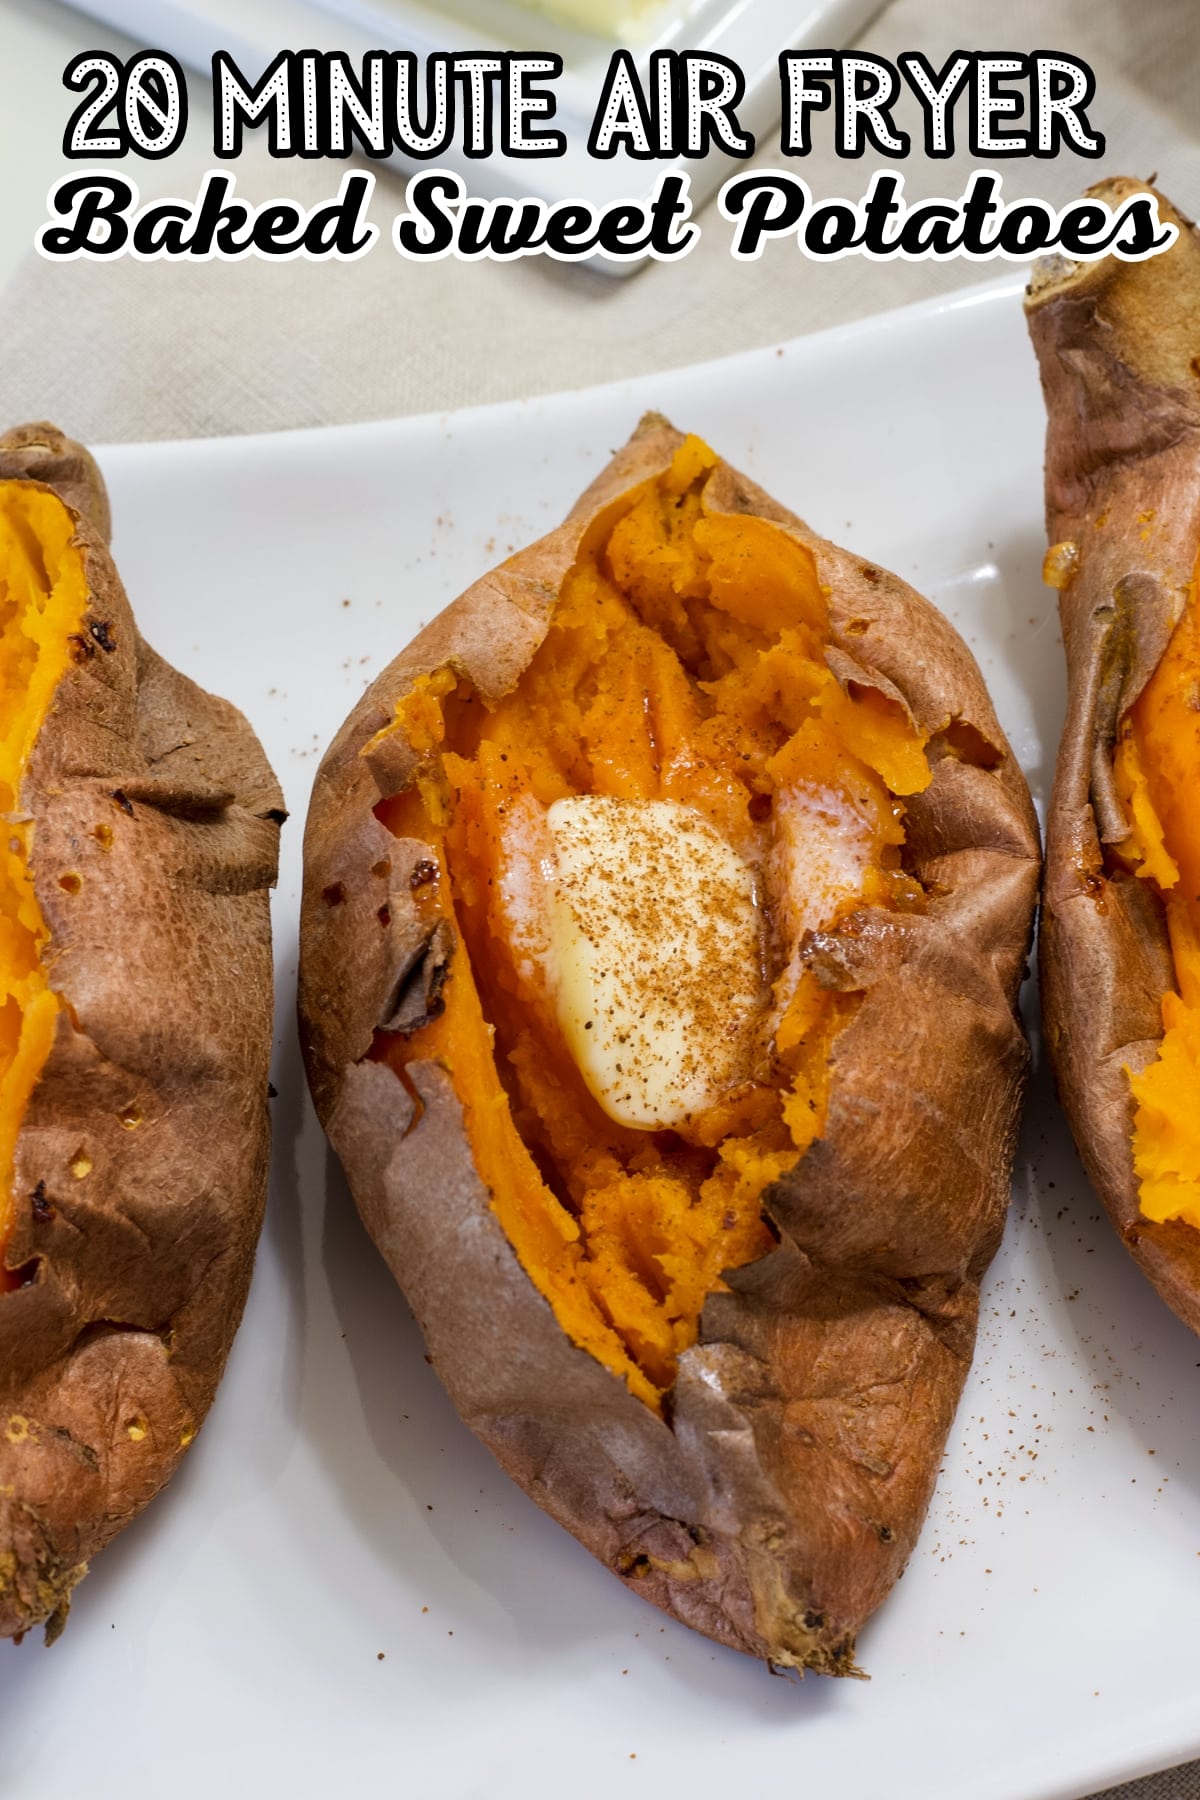 Looking for a quick and easy side dish? Try air fryer baked sweet potatoes for a healthy and delicious option. Ready in 20 minutes! via @mindyscookingobsession